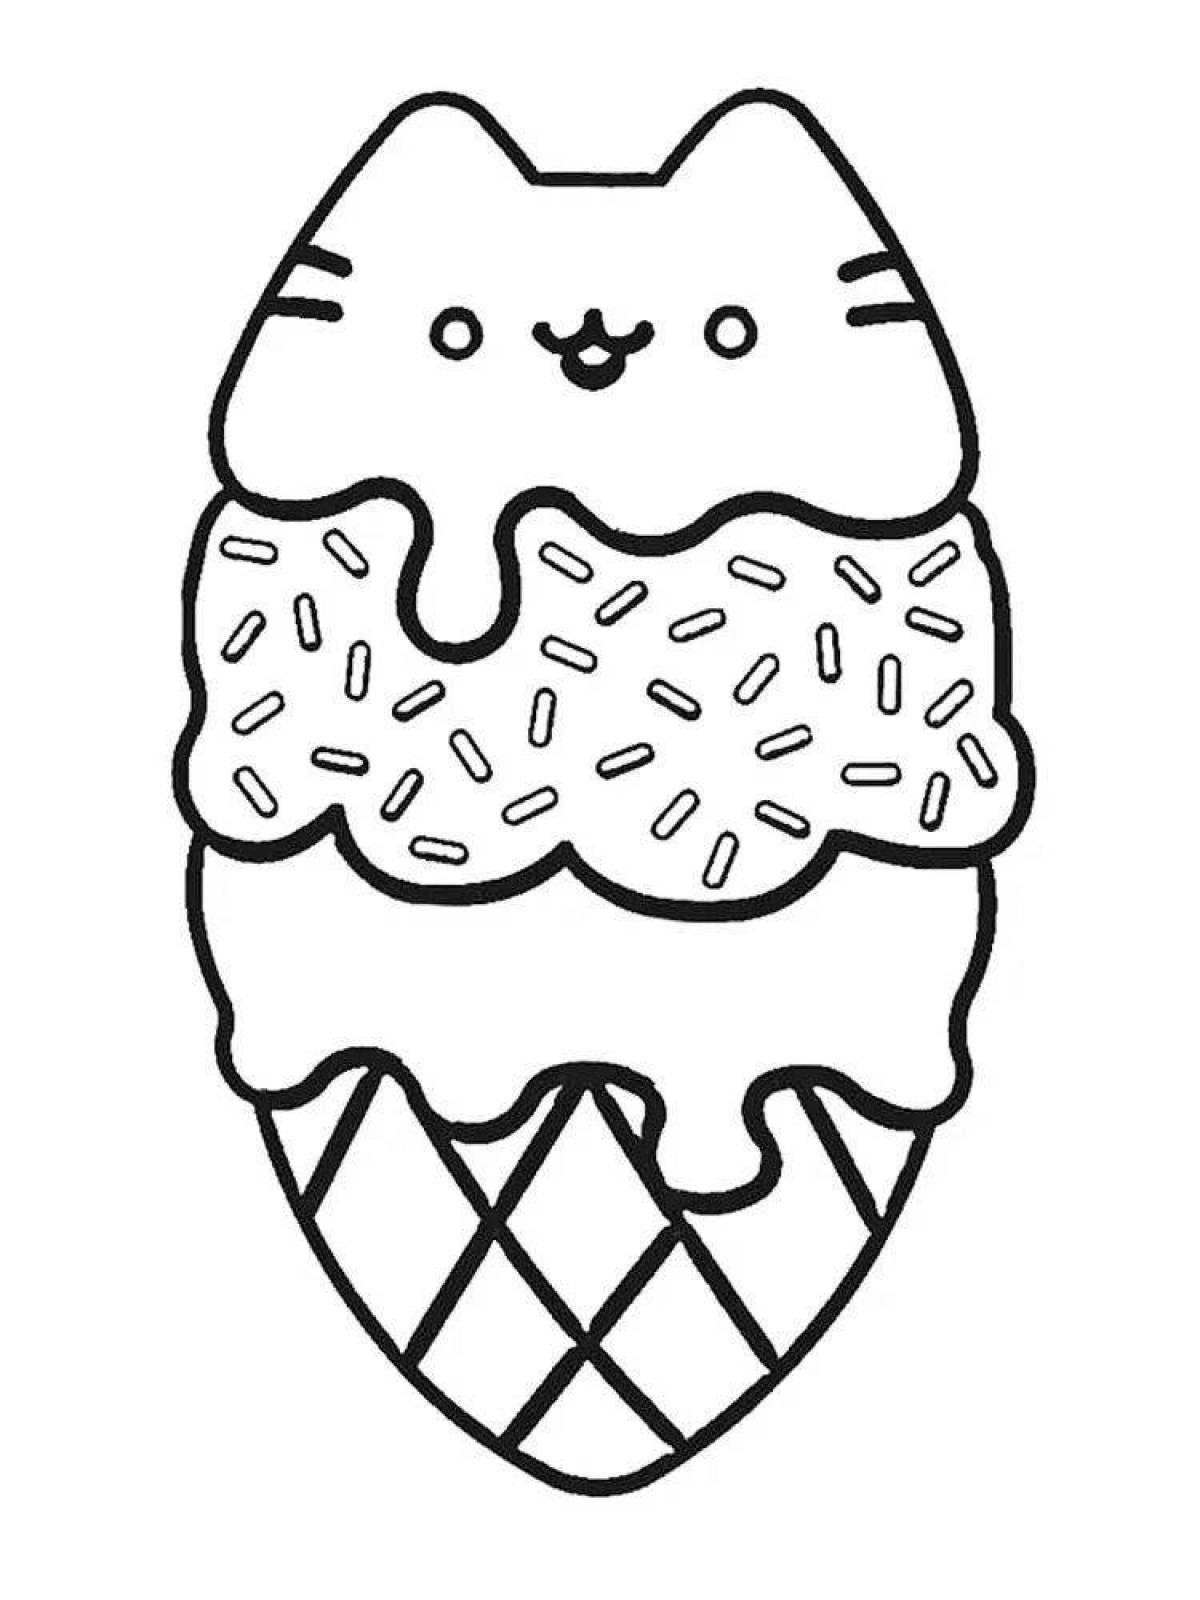 Cute and lovable cat coloring book